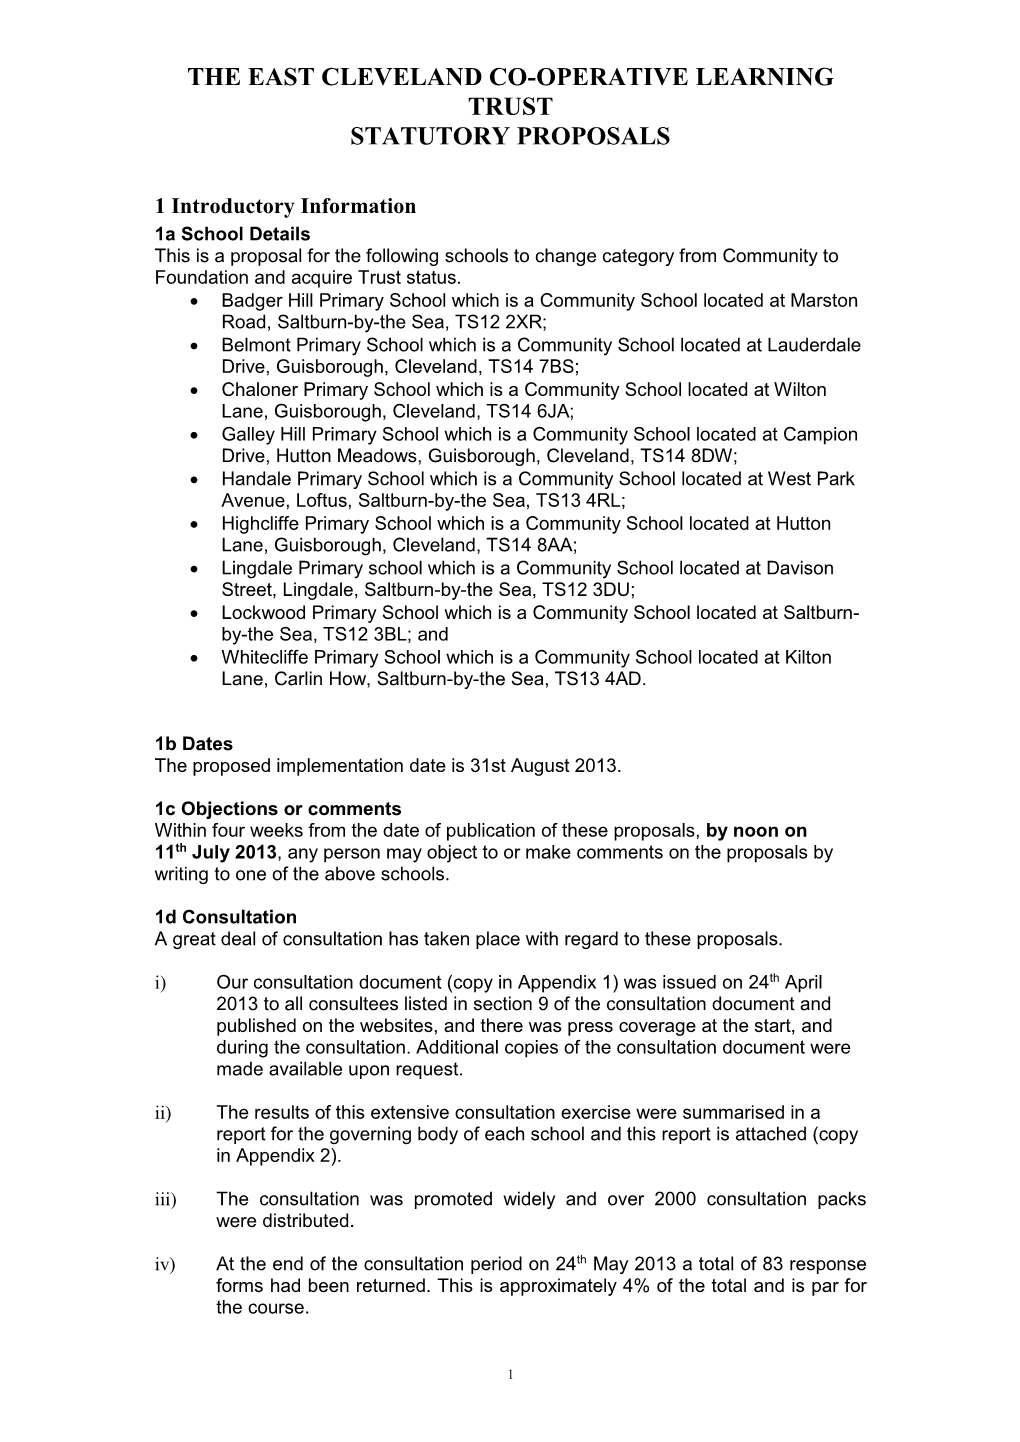 The East Cleveland Co-Operative Learning Trust Statutory Proposals